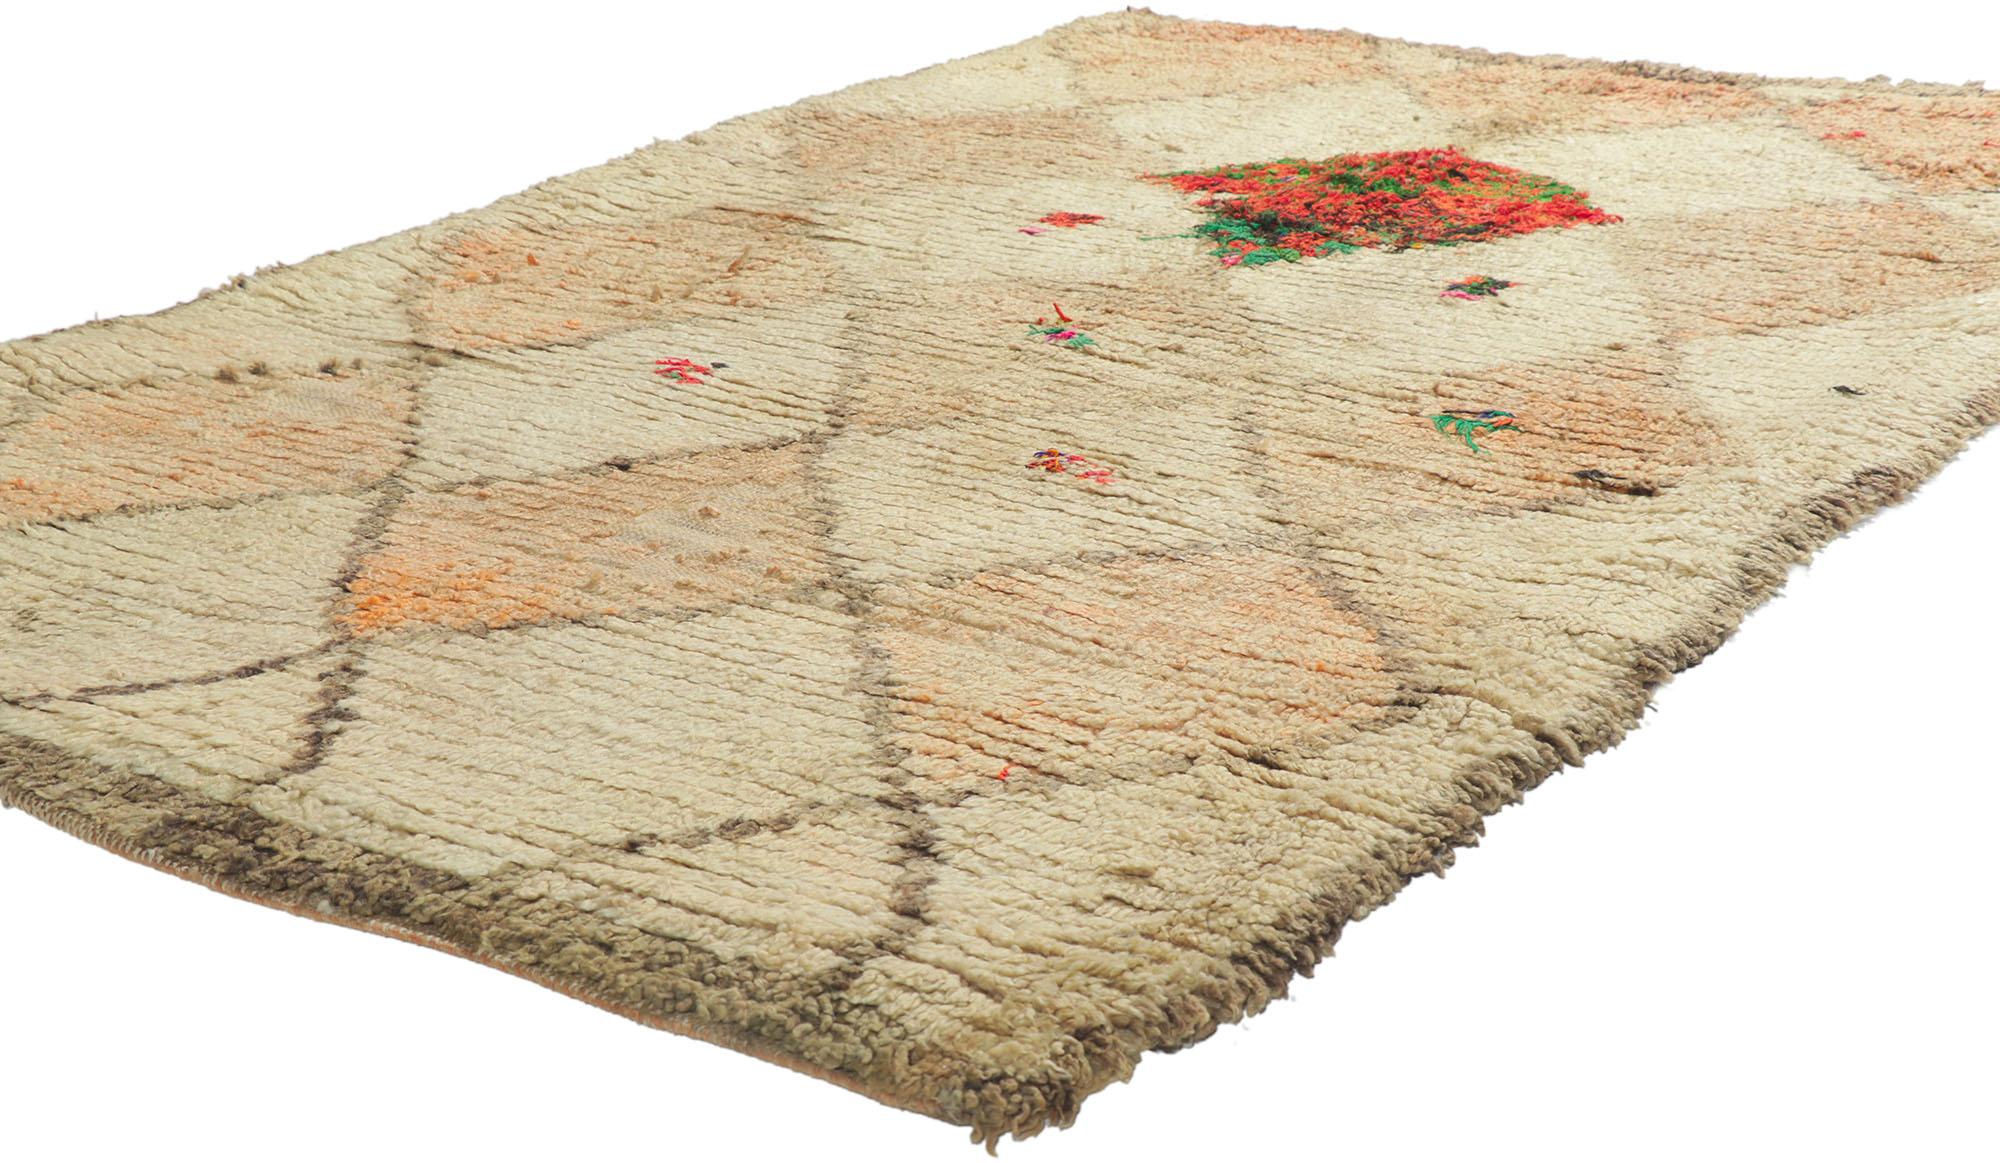 21613 Vintage Berber Moroccan Azilal Rug, 03'11 x 06'03. With its simplicity, boho chic style, incredible detail and texture, this hand knotted wool vintage Berber Moroccan Azilal rug is a captivating vision of woven beauty. The abrashed field